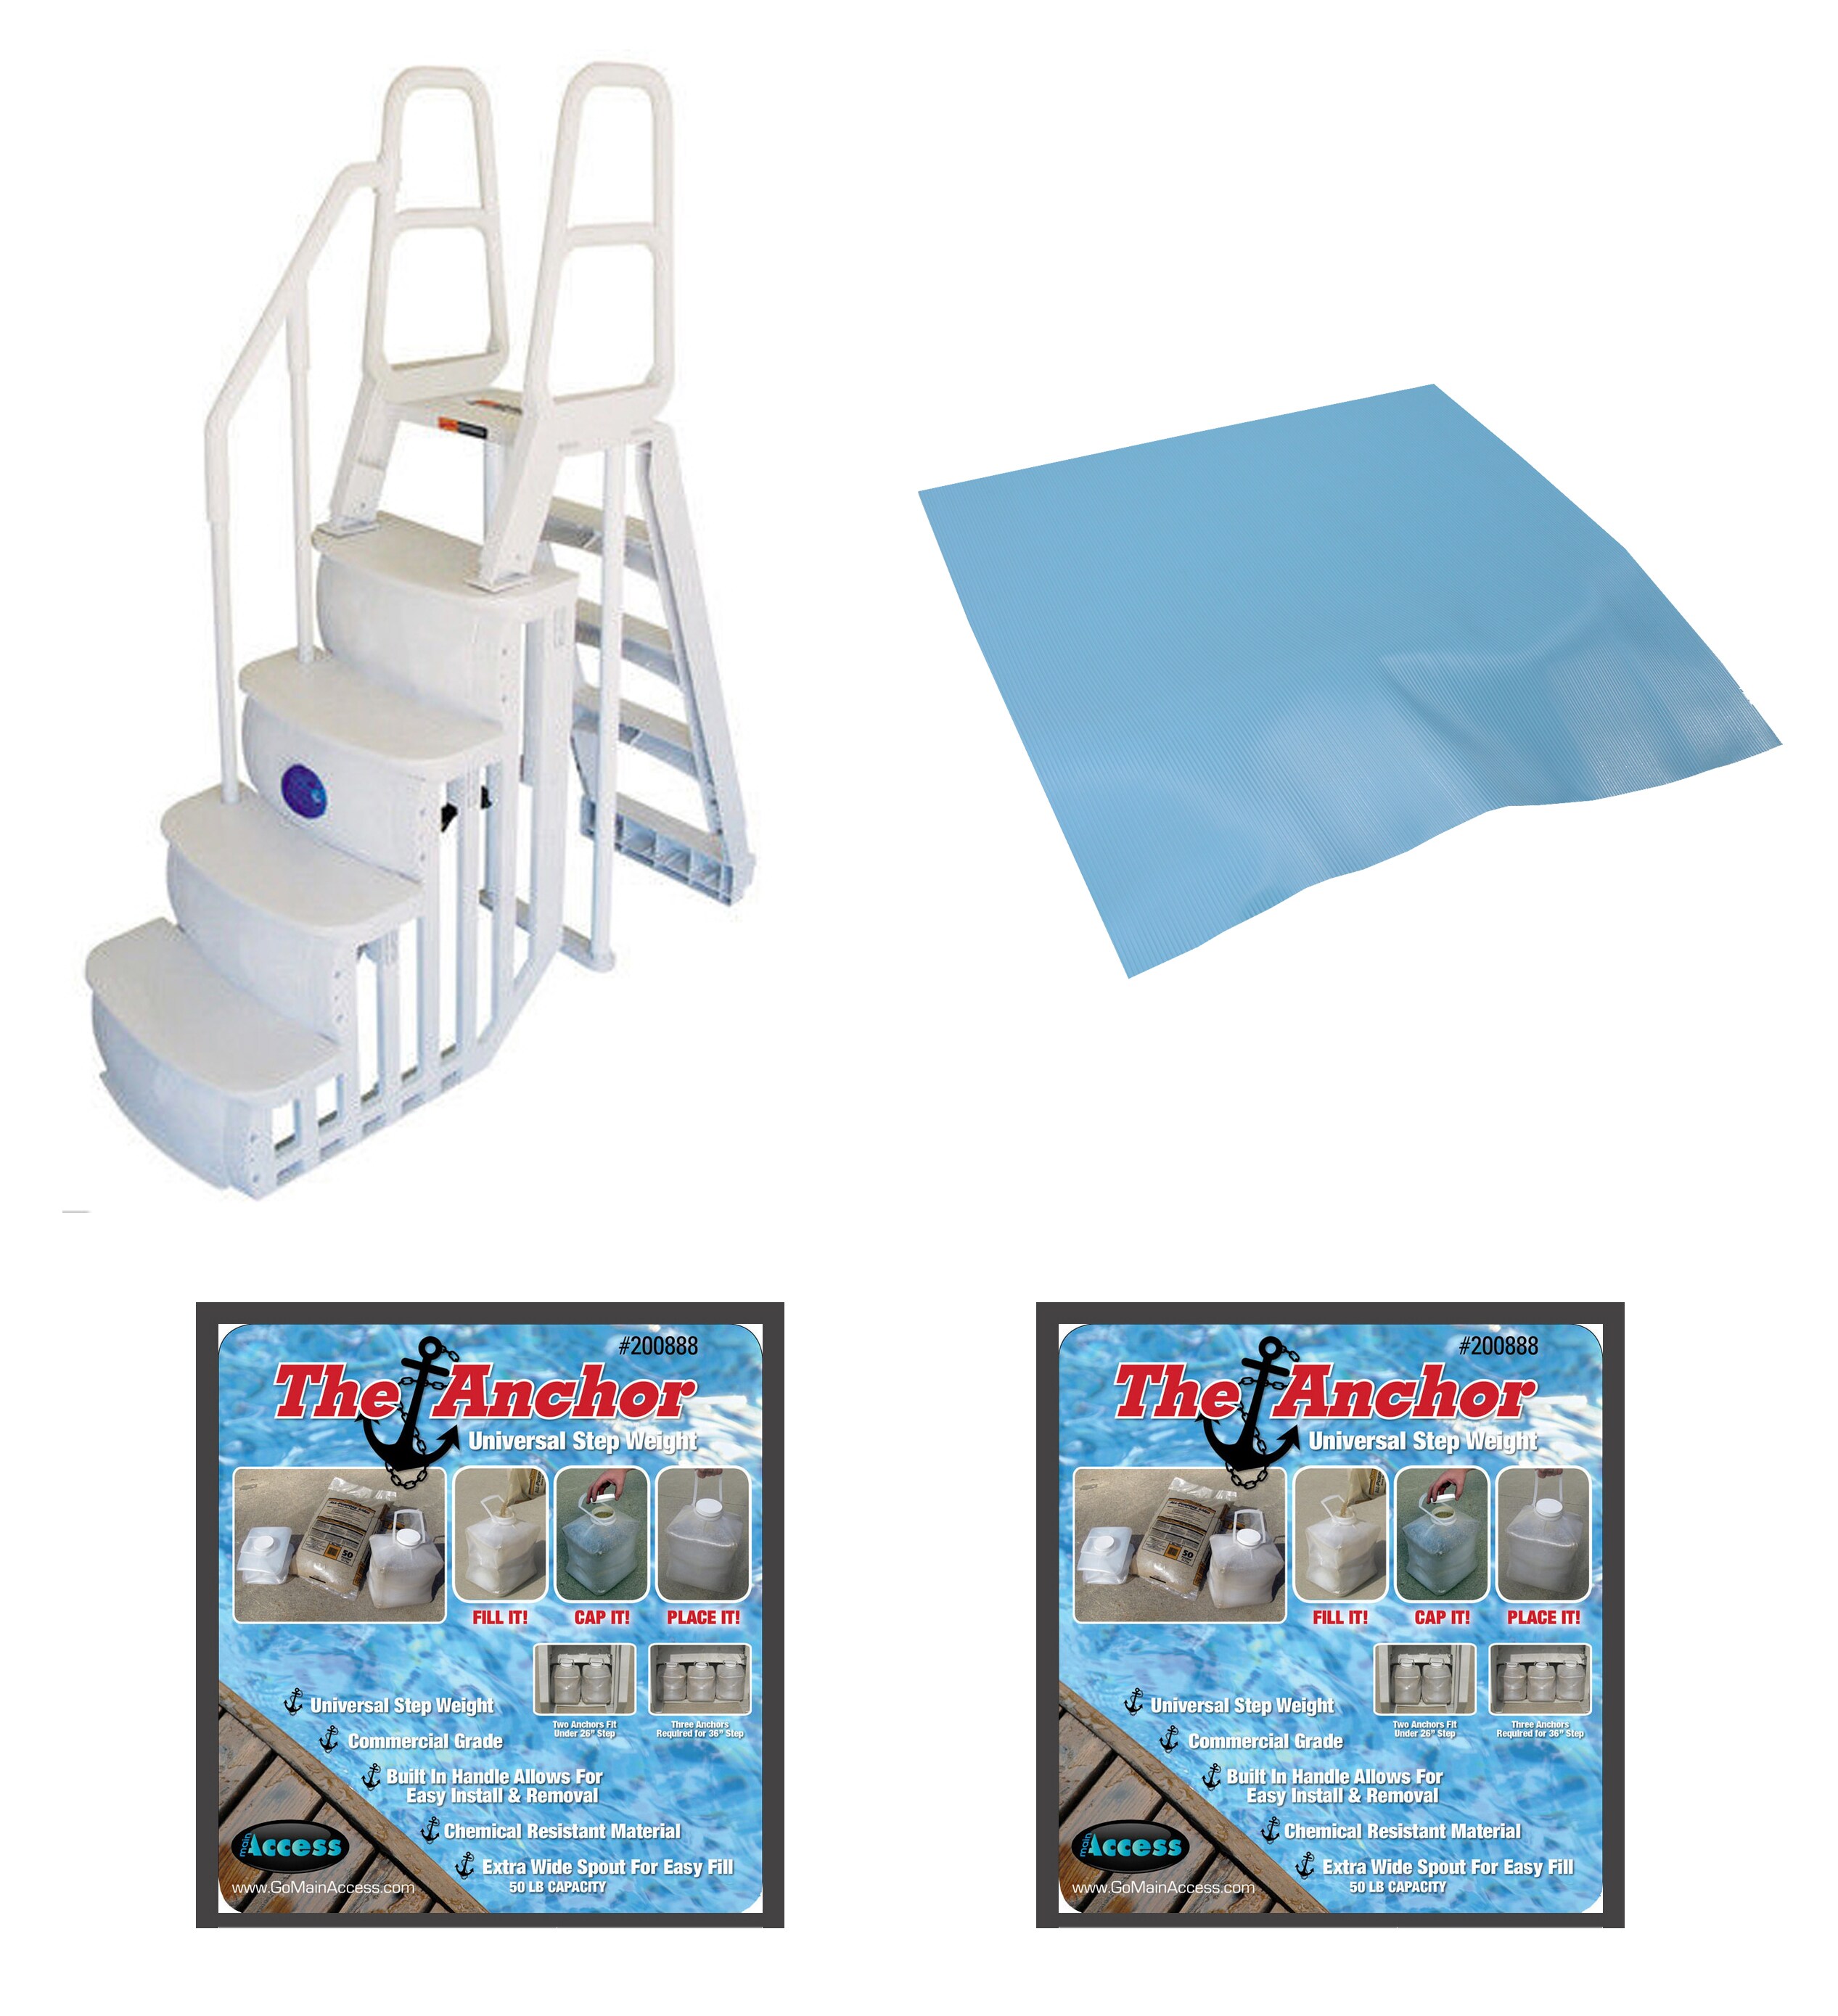 Main Access 200100T Above Ground Swimming Pool Step Ladder System w/ LED Light 